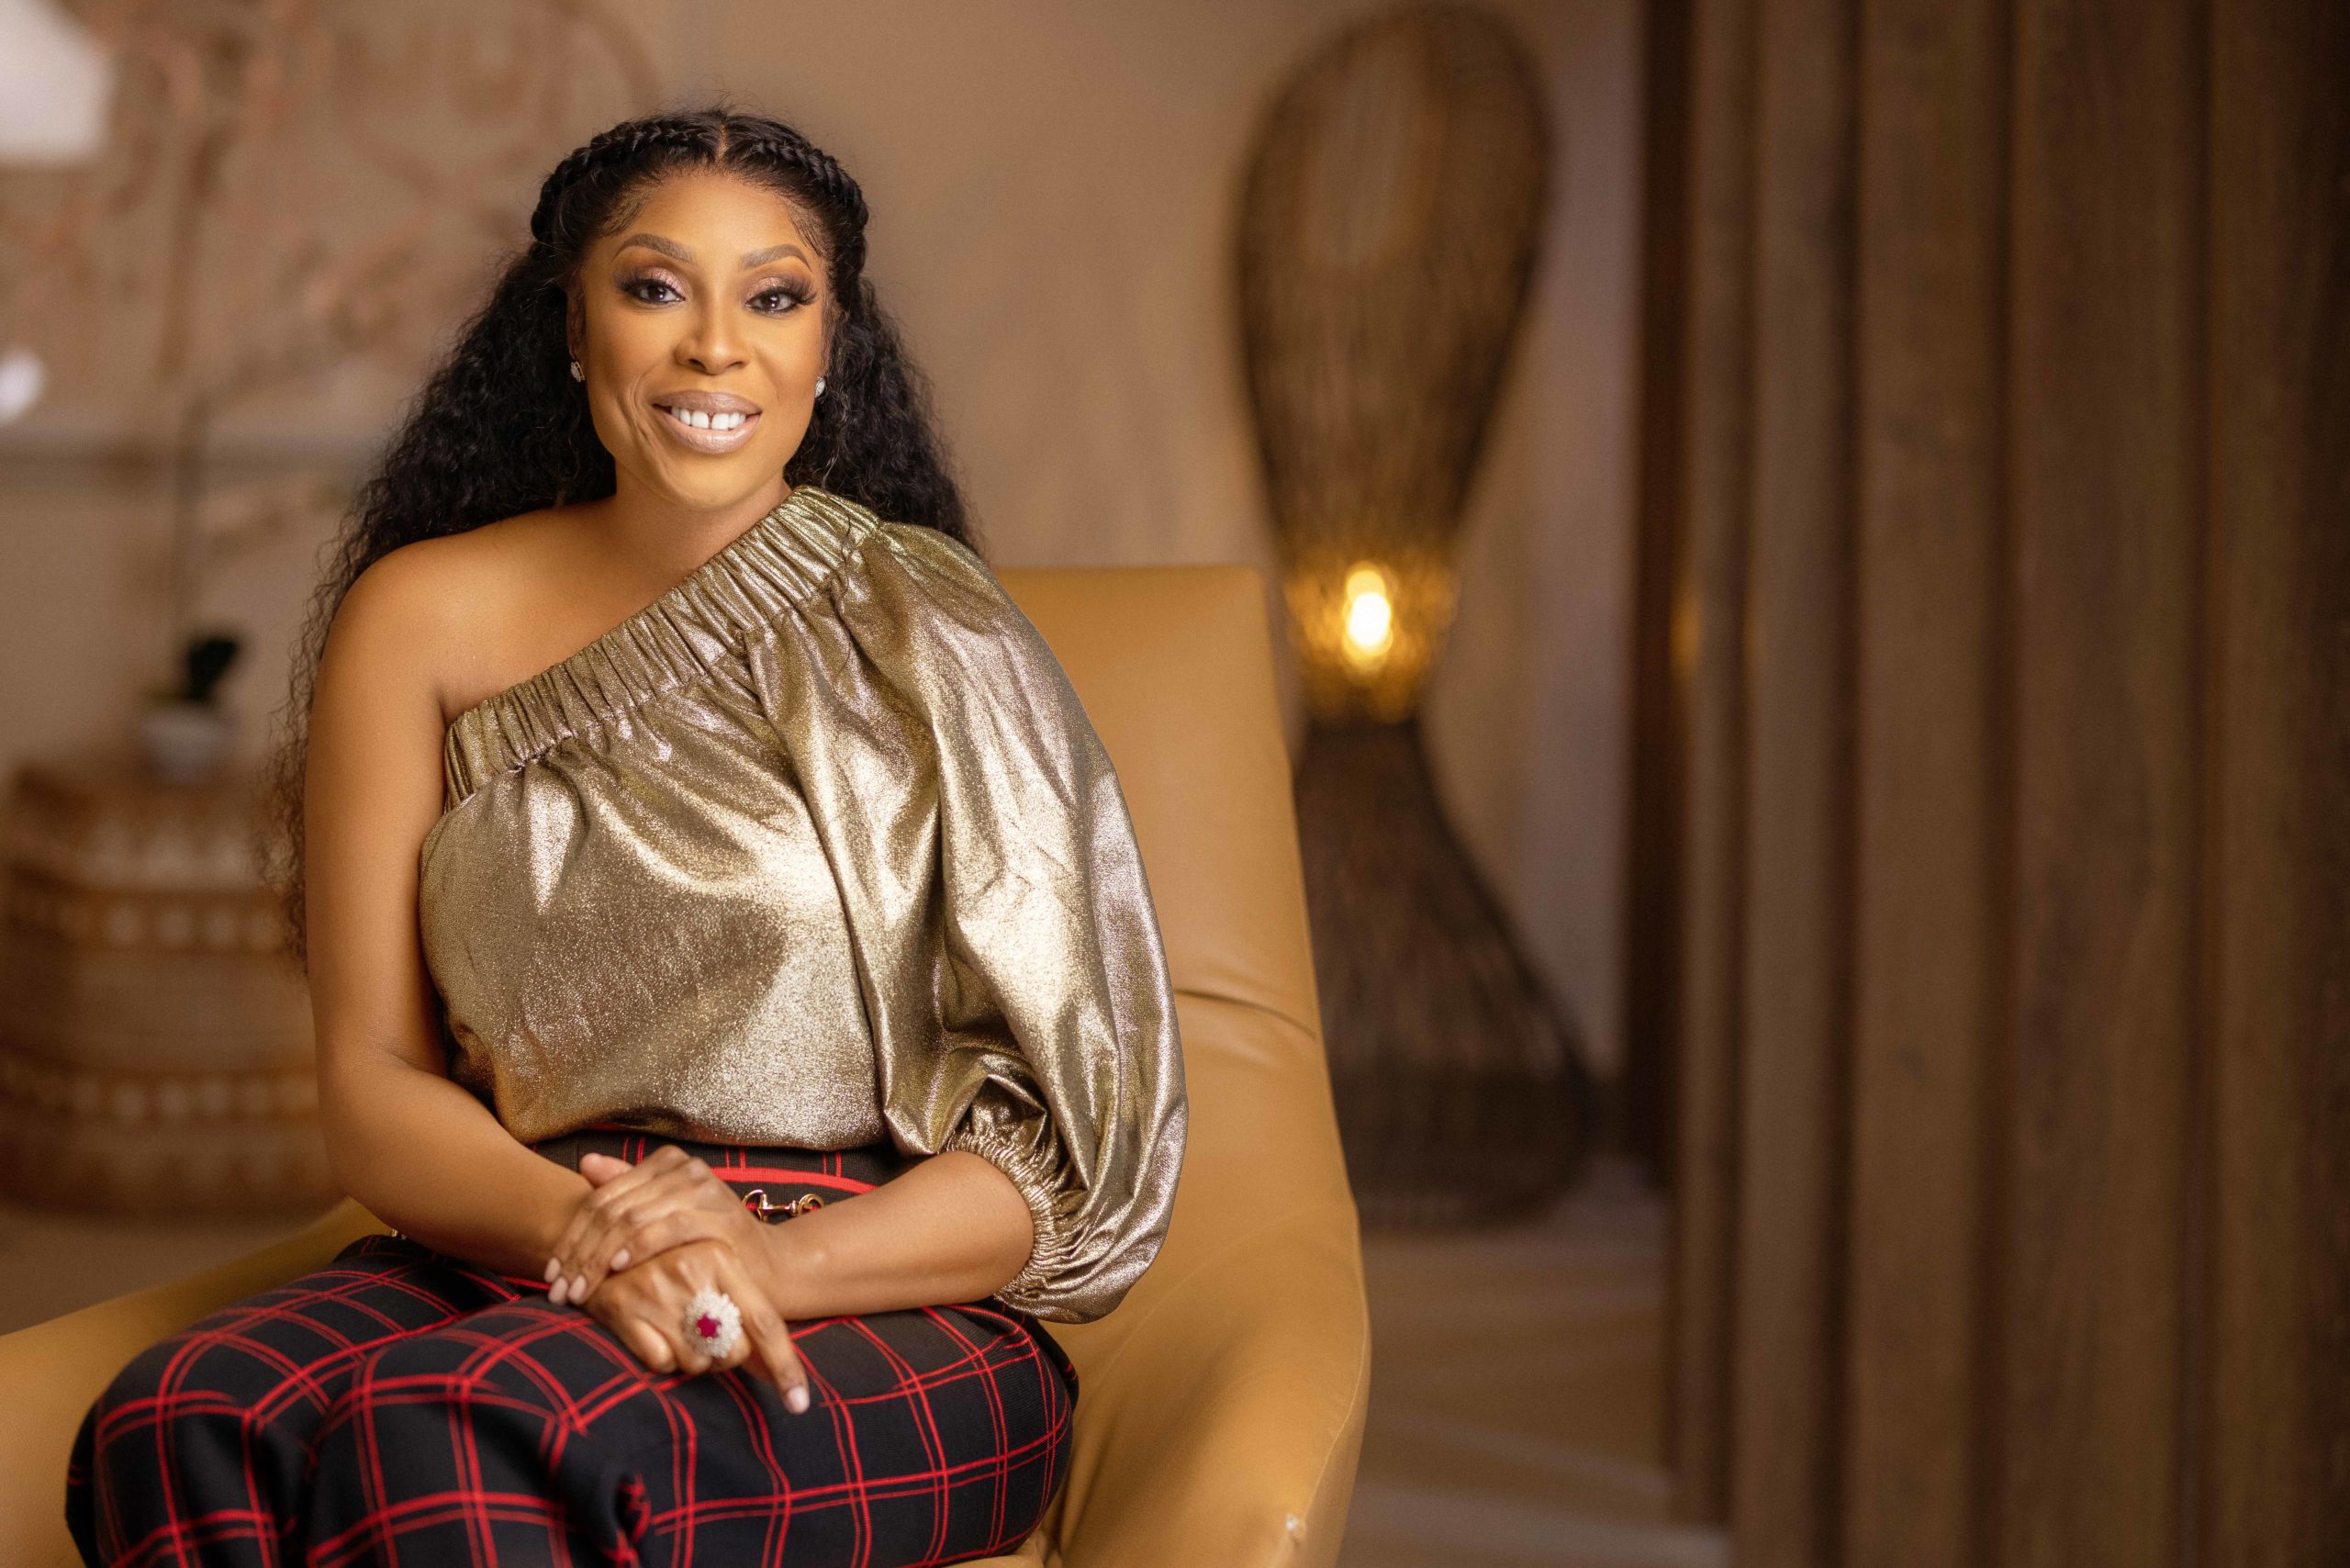 Celebrated Nigerian Producer Mo Abudu joins Academy of Motion Picture Arts and Sciences